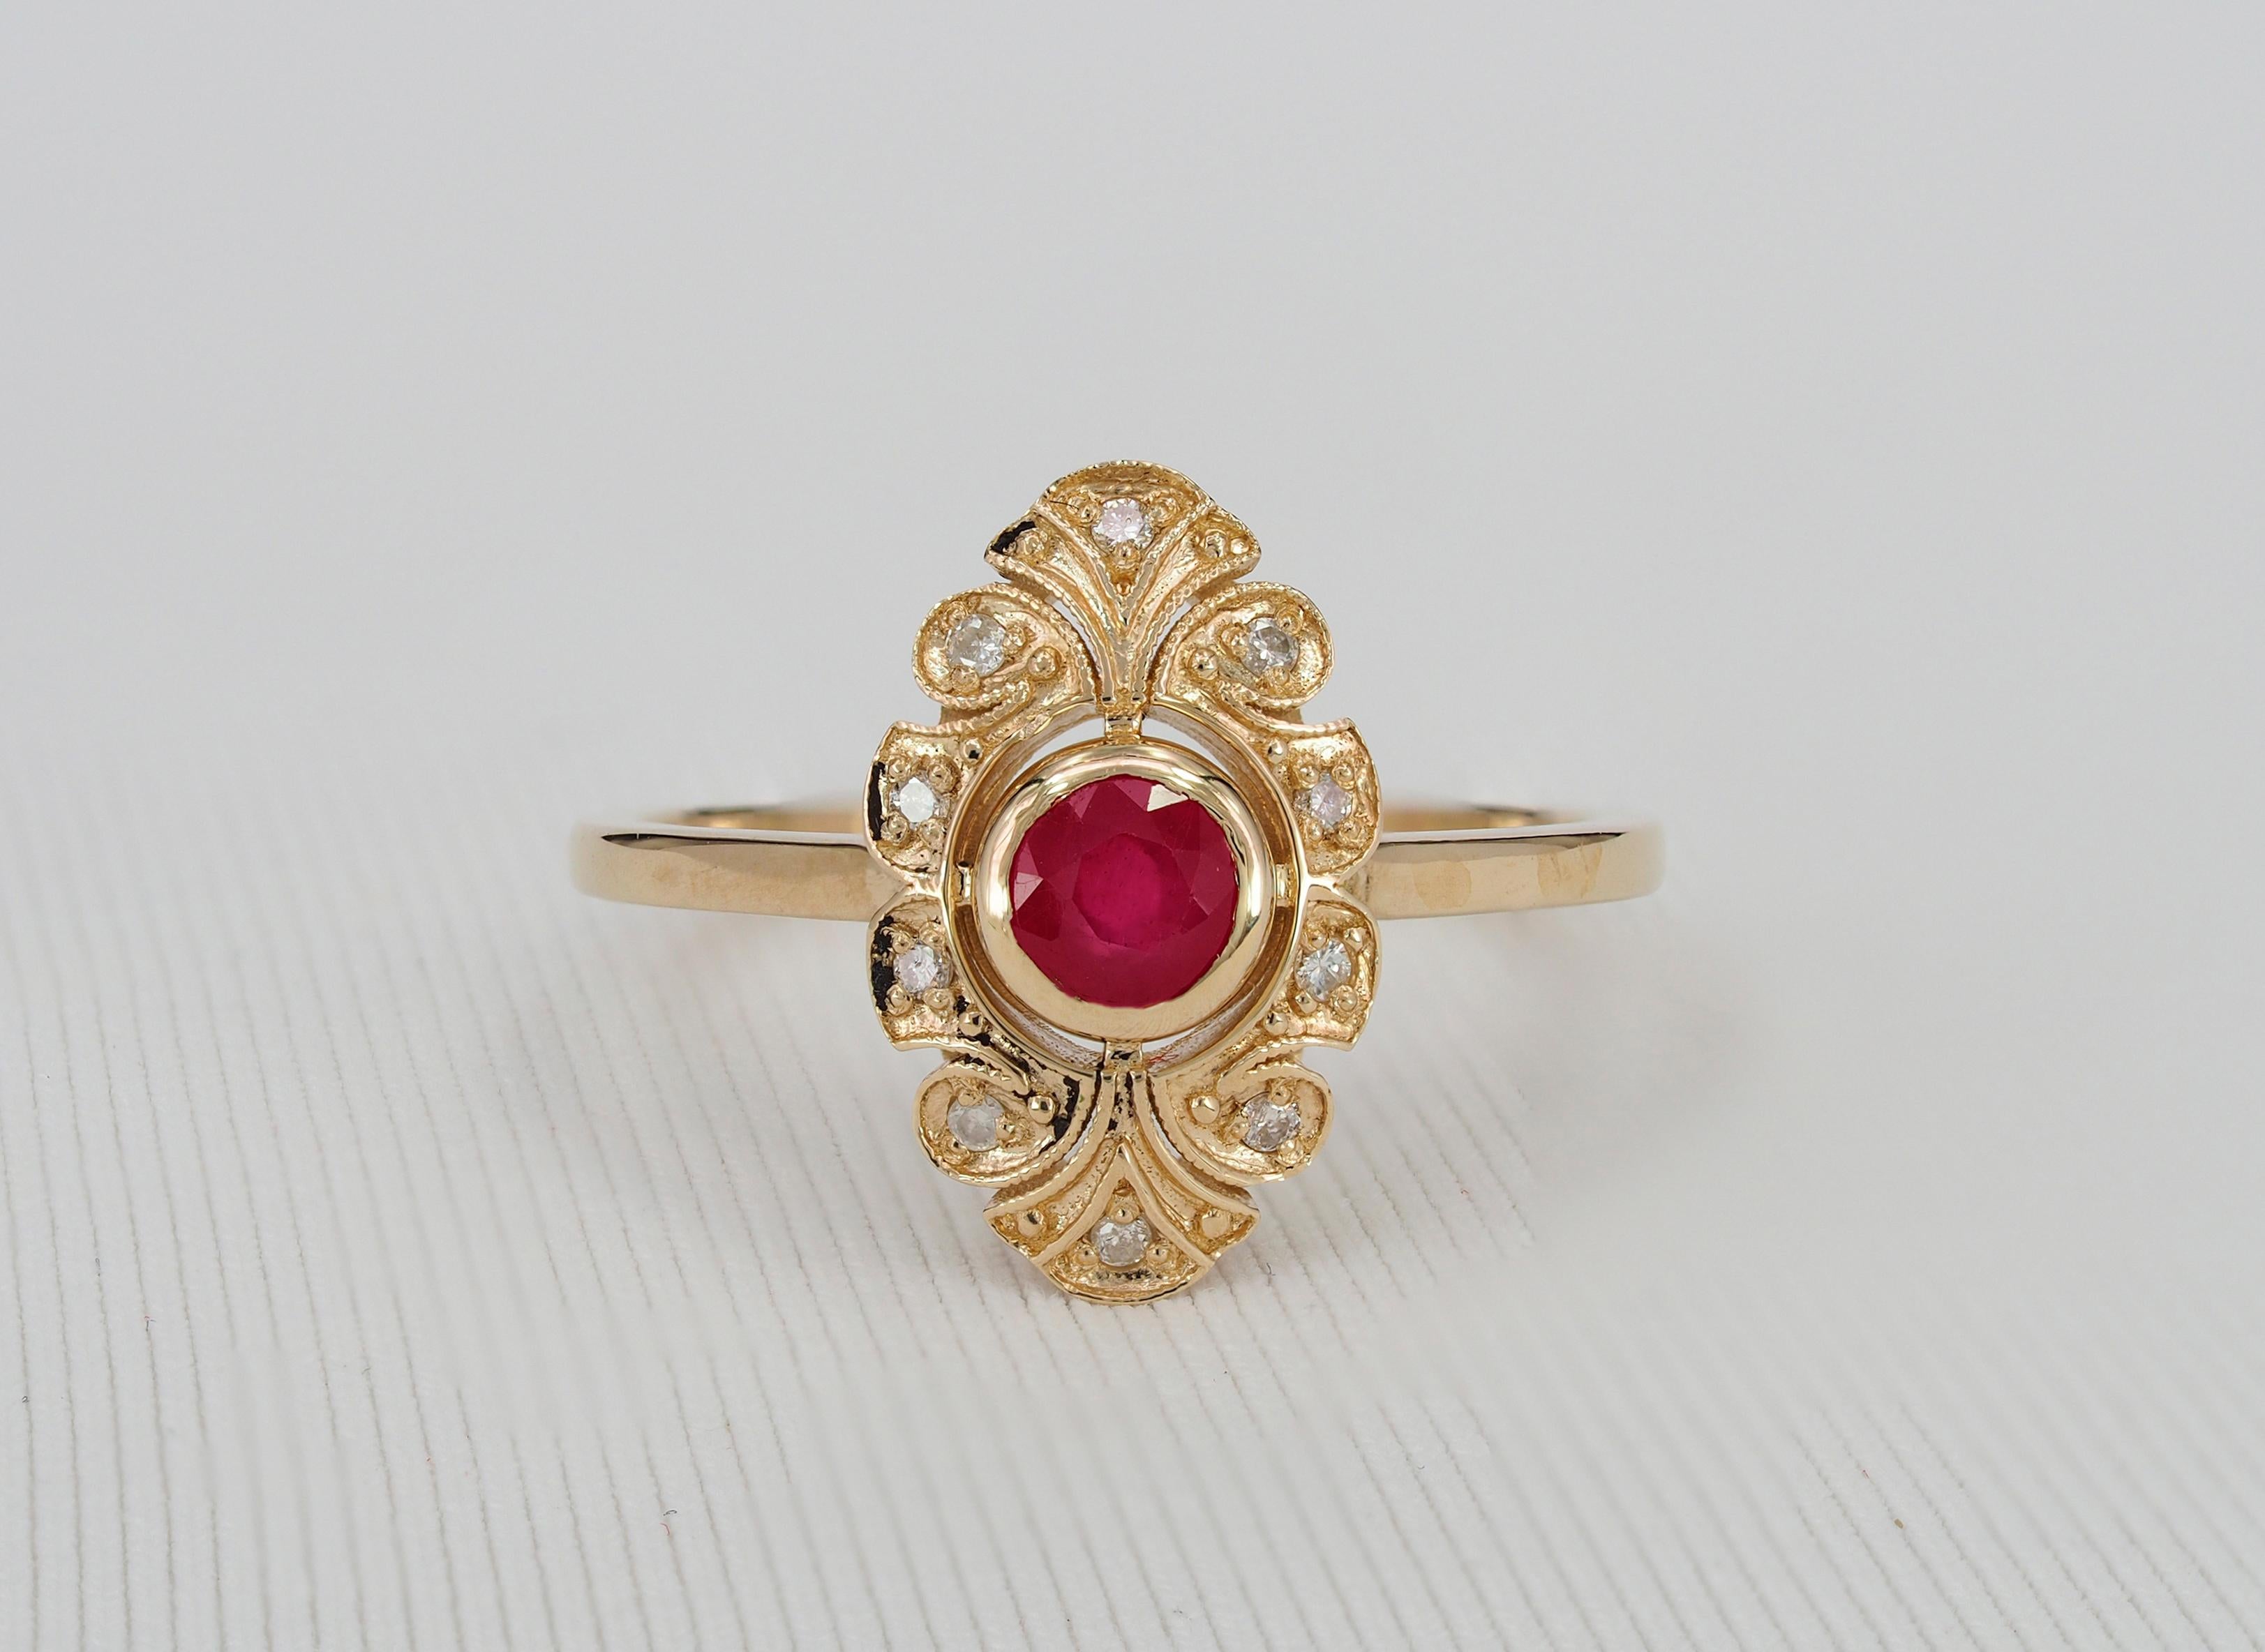 Modern 14 Karat Gold Ring with Ruby and Diamonds, Vintage Inspired Ring